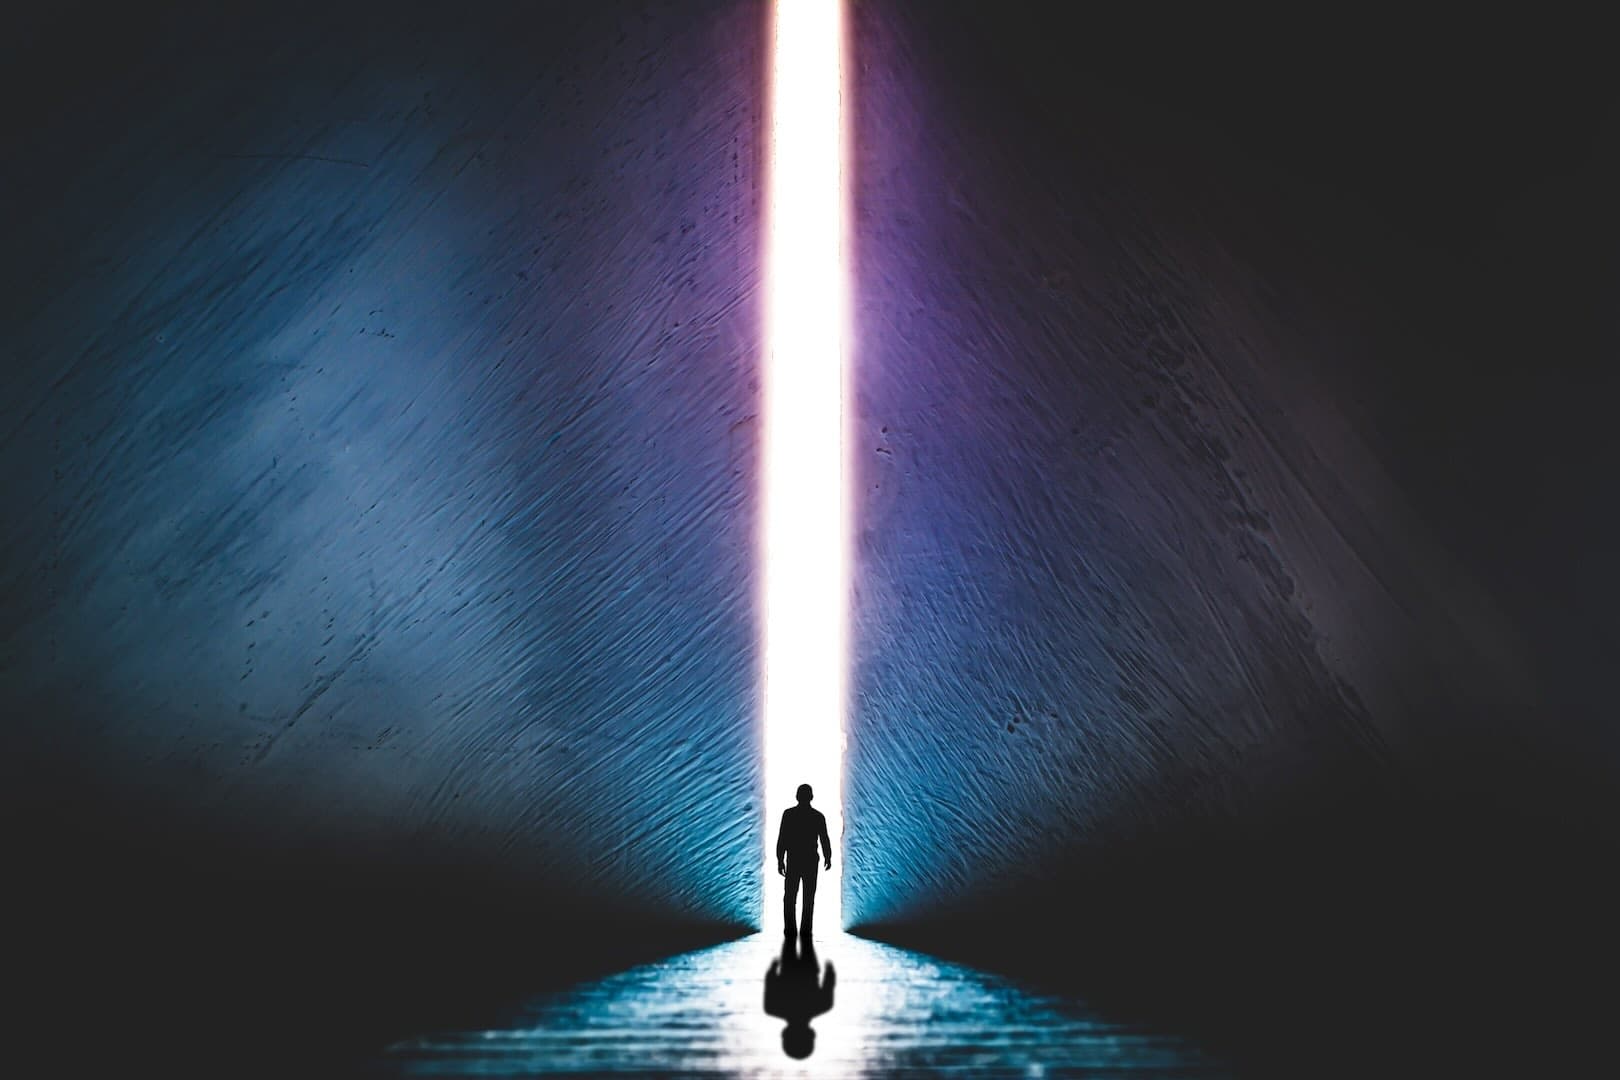 Silhouette of a person standing in front tall ray of light created by the opening between 2 big walls, looking like he is about to enter the light